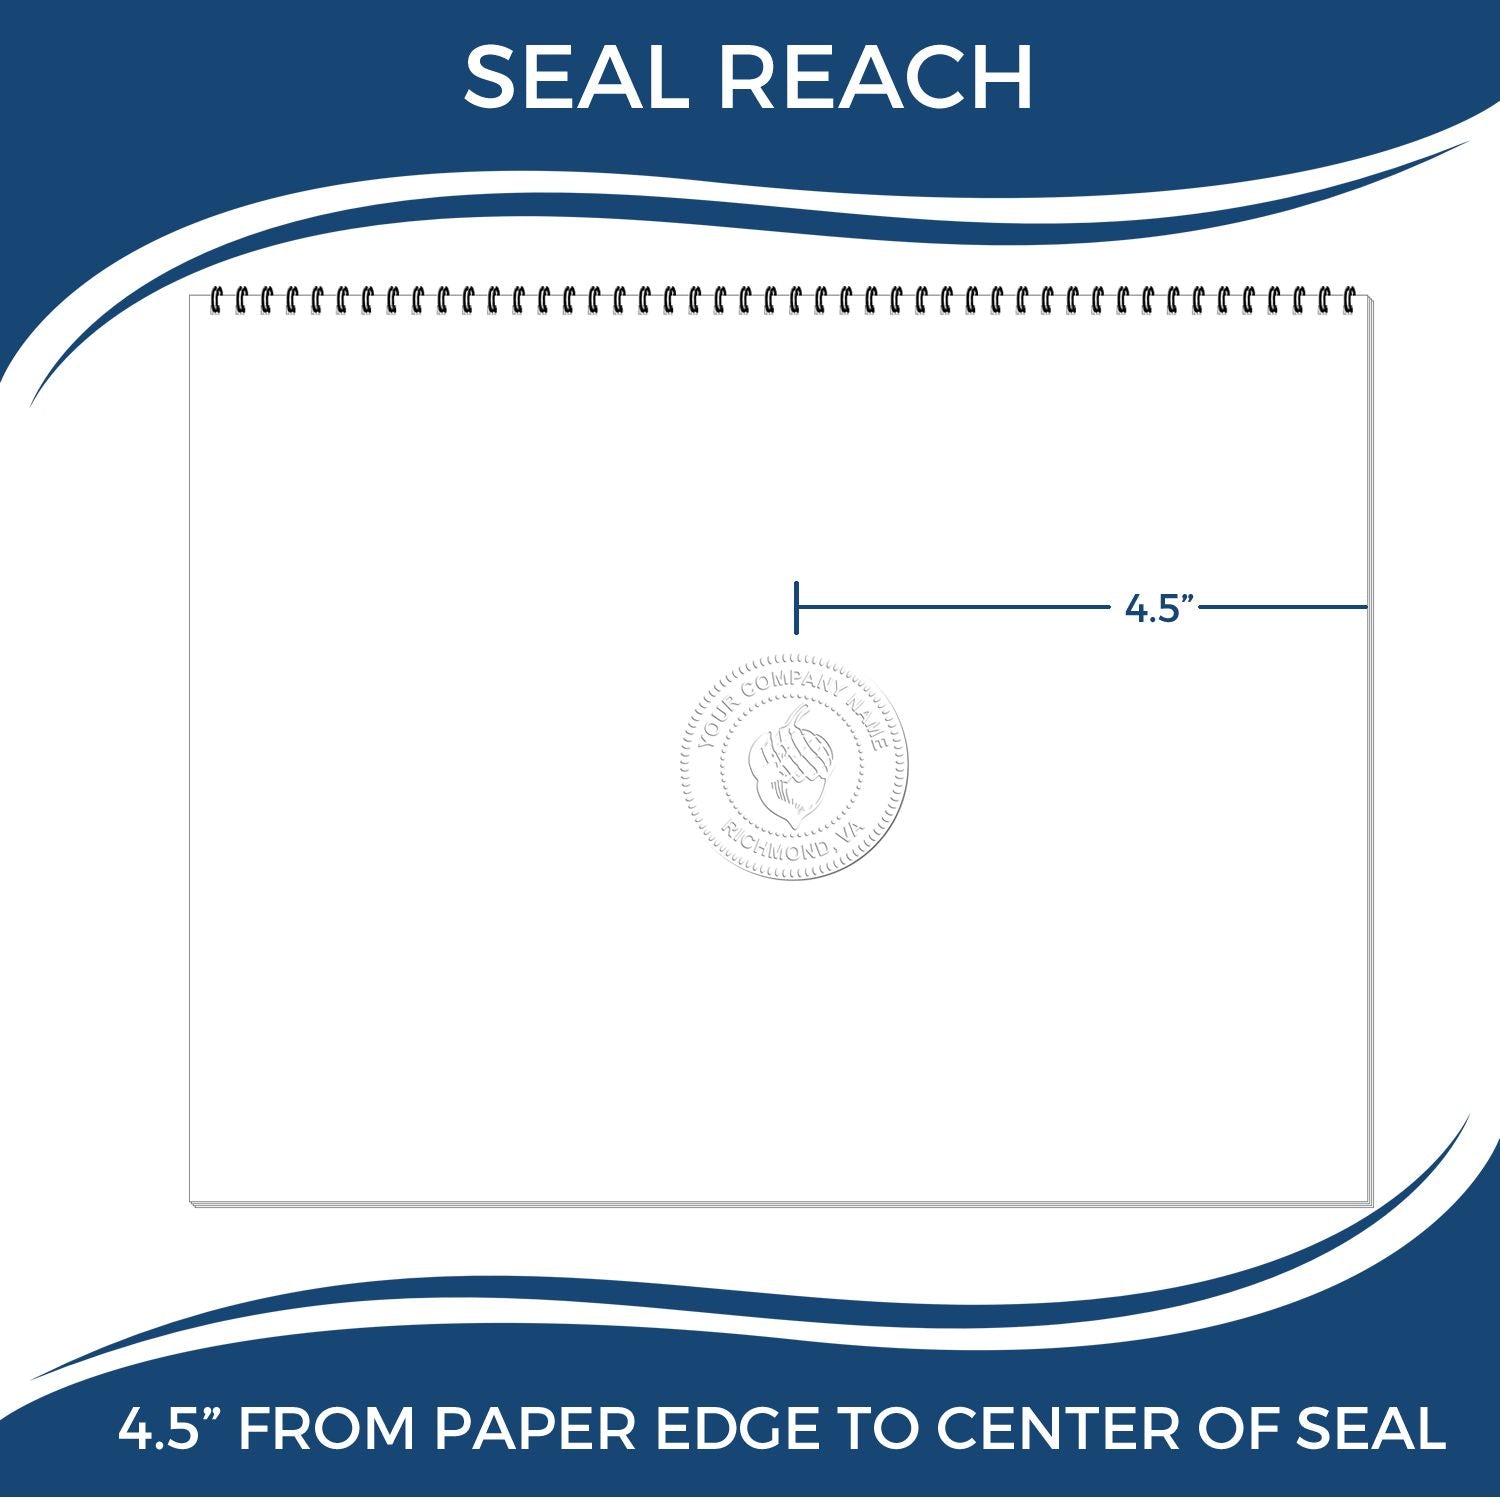 An infographic showing the seal reach which is represented by a ruler and a miniature seal image of the Extended Long Reach District of Columbia Surveyor Embosser